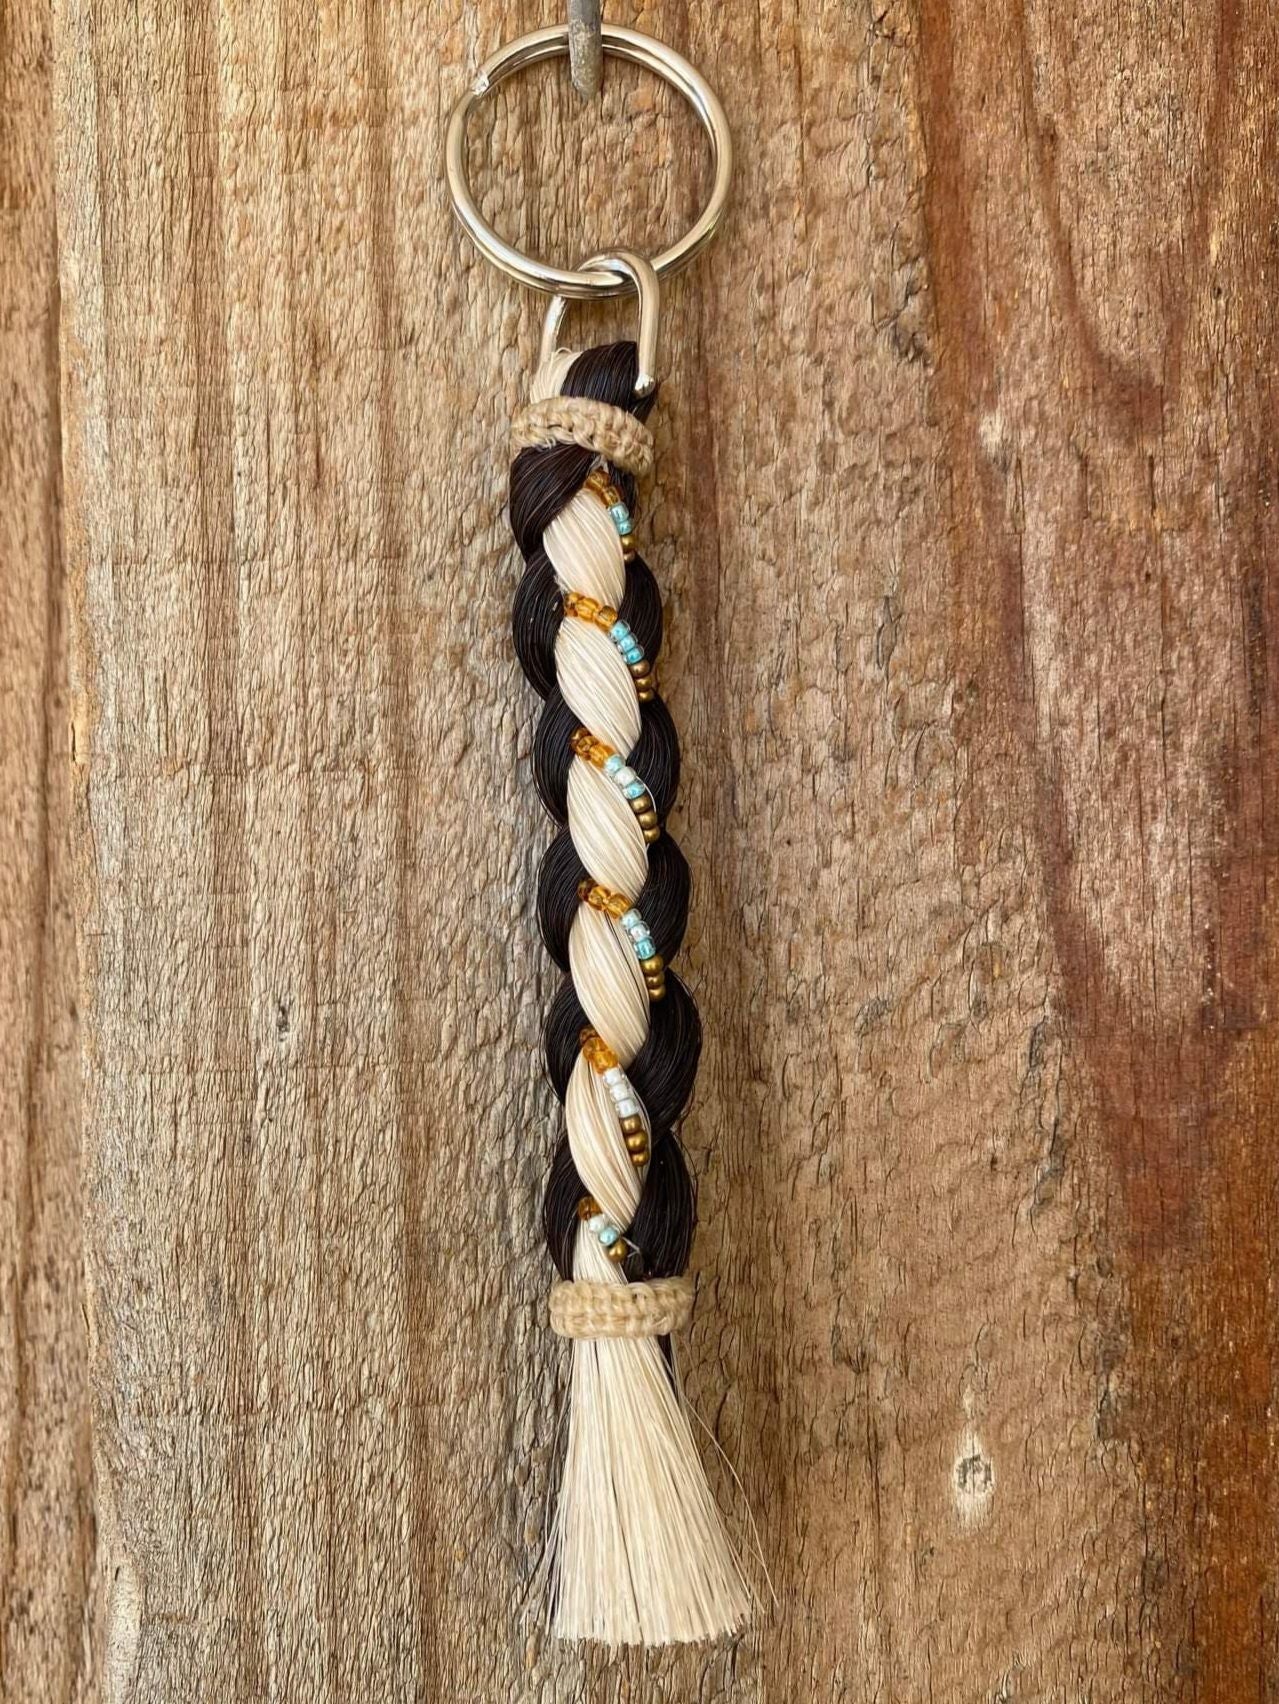 Gift - Genuine Horsehair Braided Tail Key Ring with Beads